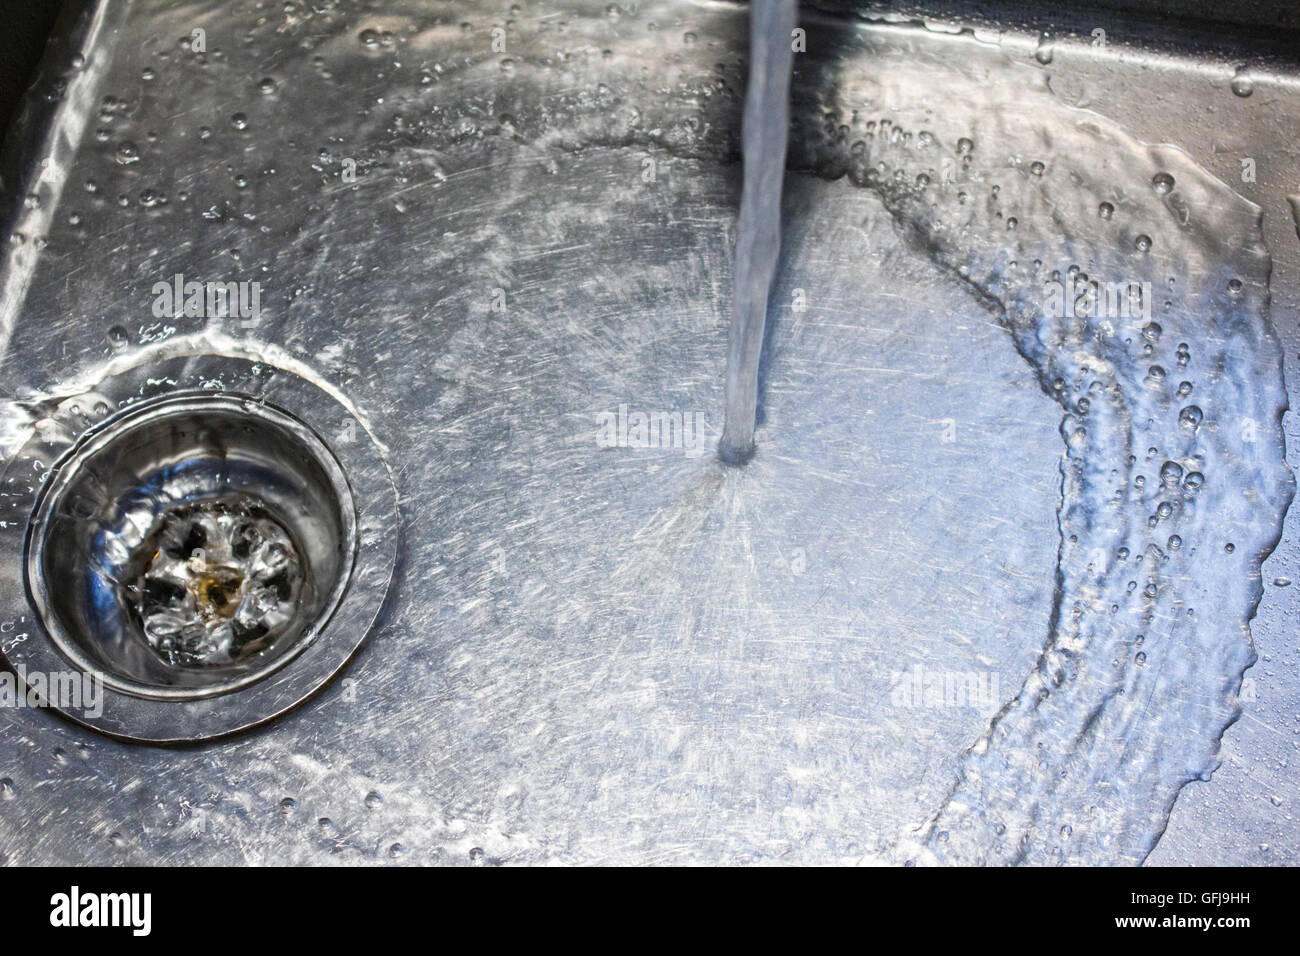 Water from a tap runs down the drain in a stainless steel sink Stock Photo